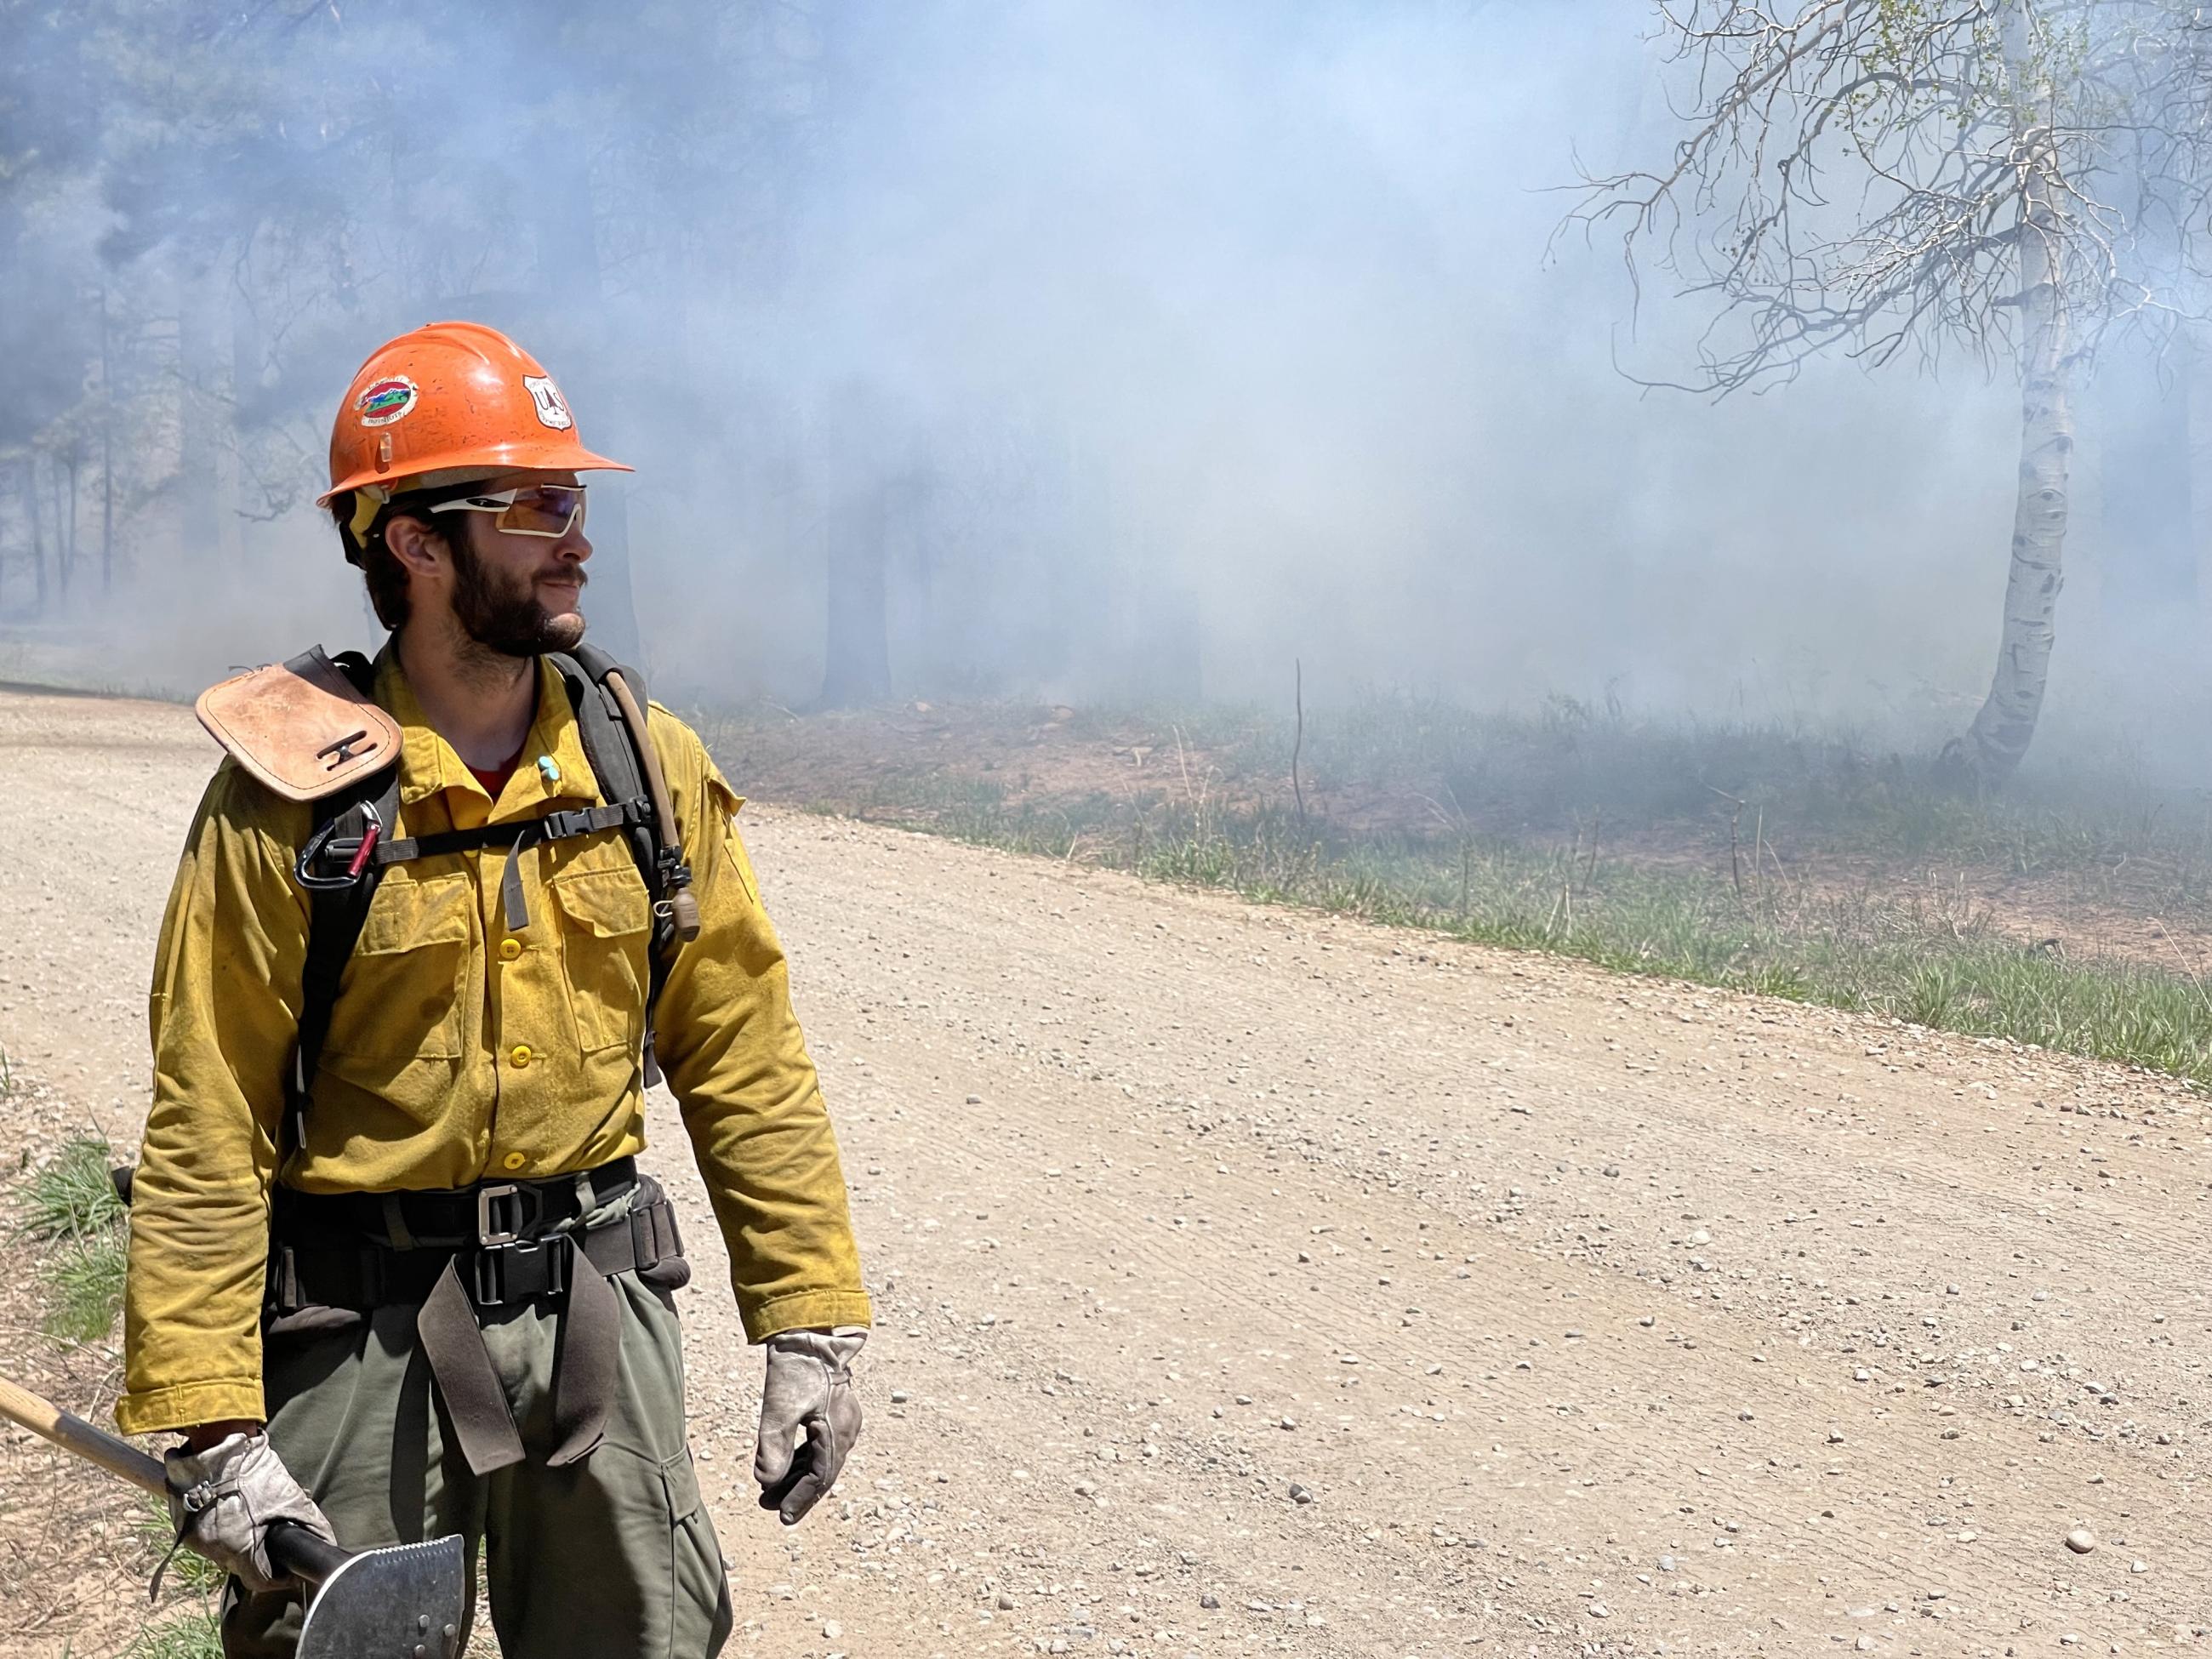 Firefighter with orange hard hat walks down the road with smoke in the background